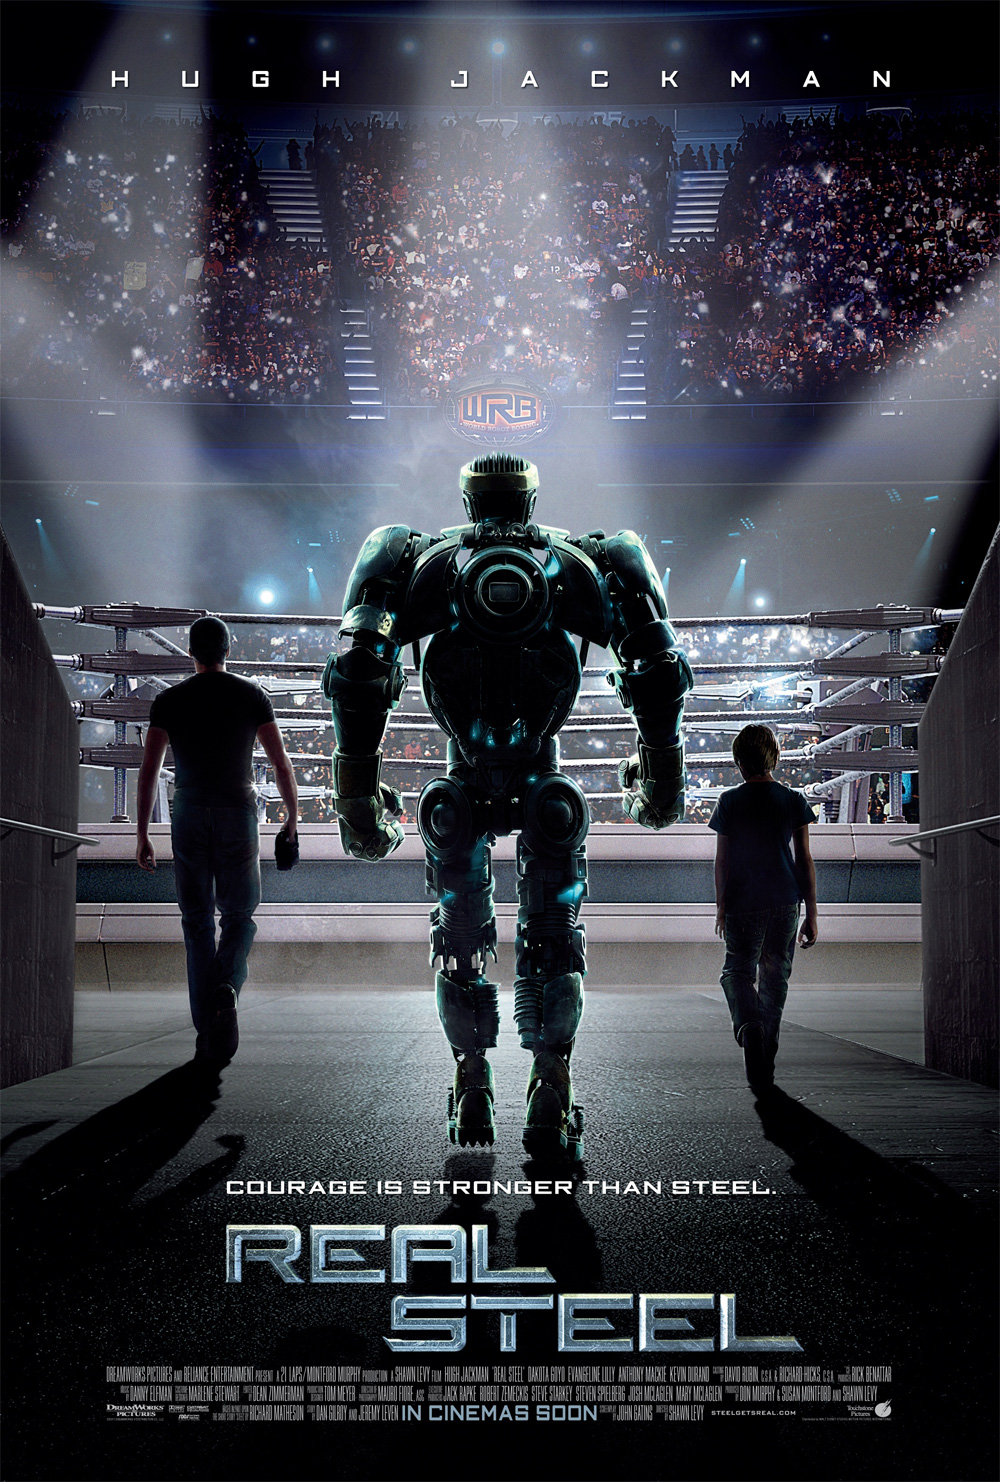 [RECENSIONE] Real Steel (Shawn Levy)